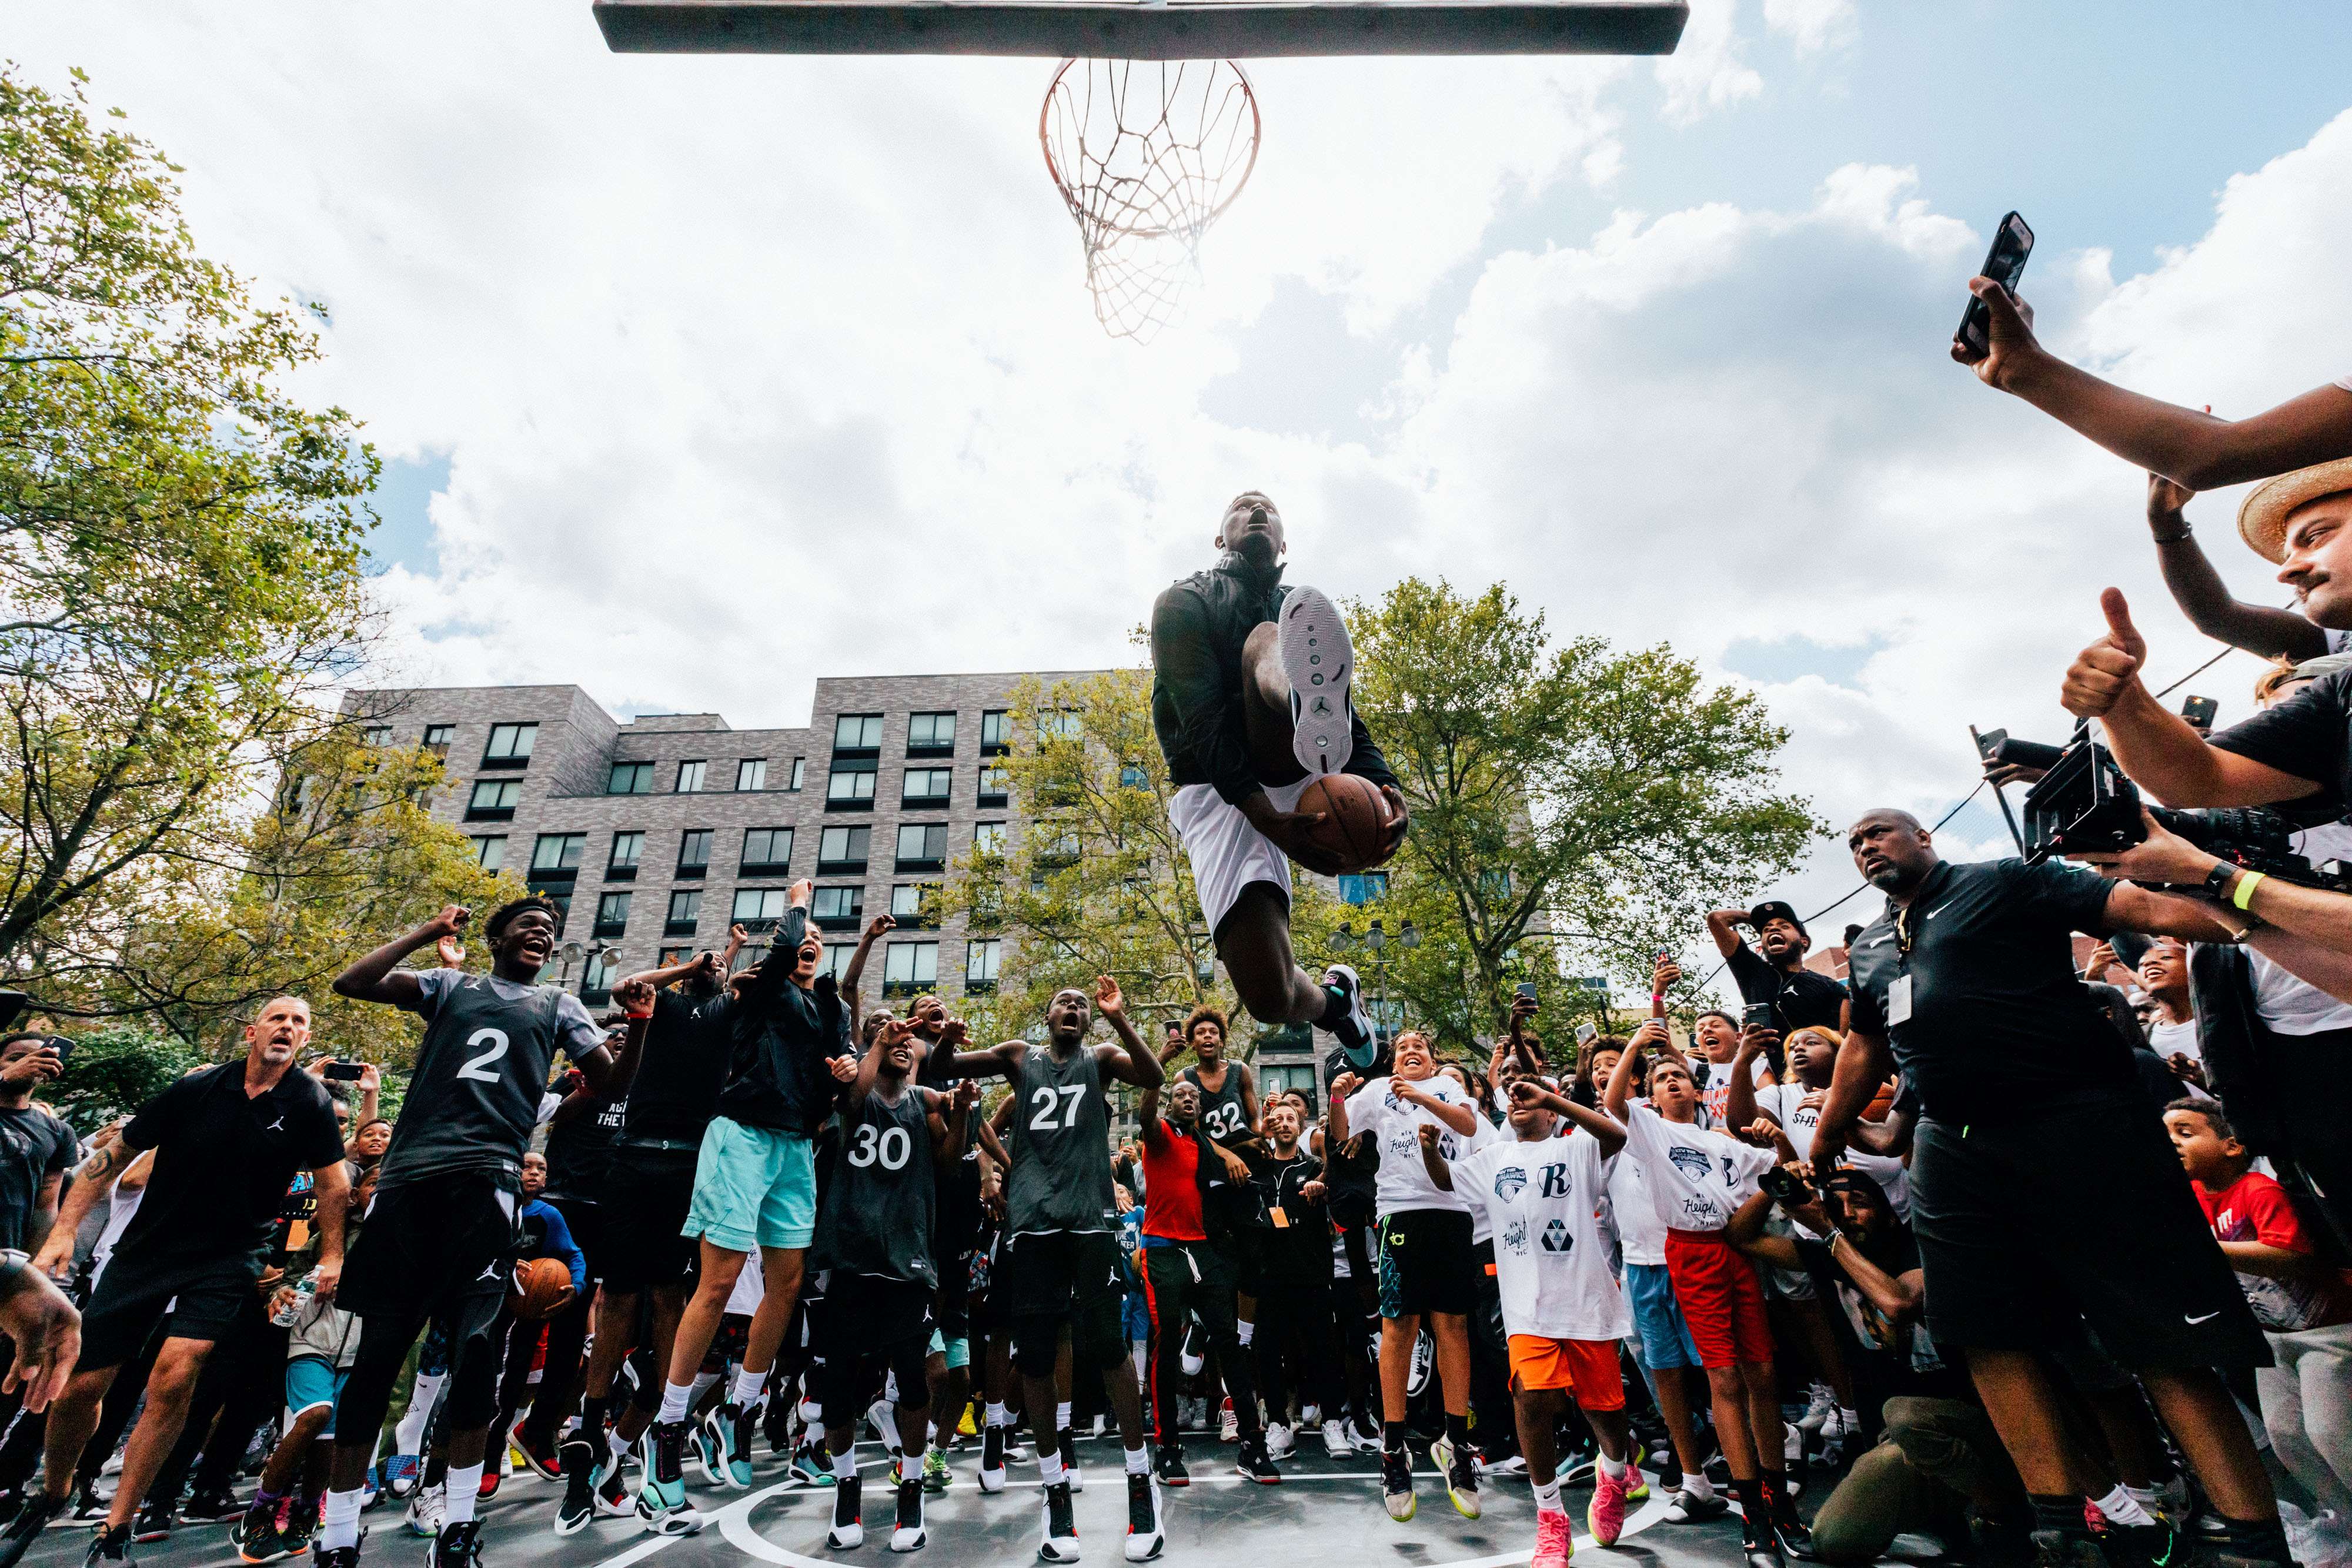 Zion Williamson dunks at the Air Jordan XXXIV launch event in Harlem